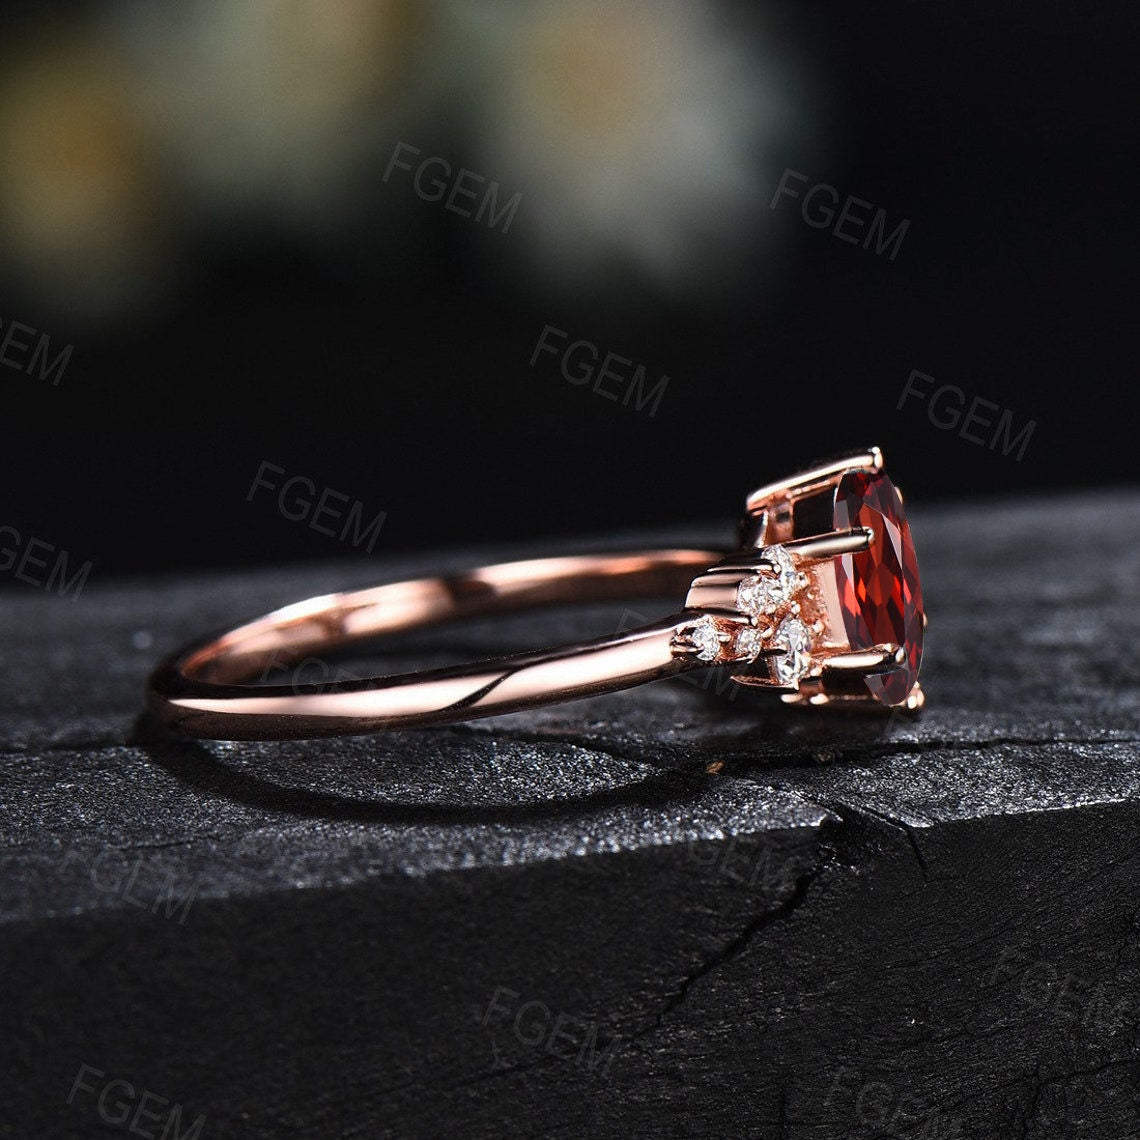 July Birthstone Wedding Ring 1ct Hexagon Cut Red Ruby Gemstone Jewelry Rose Gold Ruby Cluster Engagement Rings Anniversary Ring For Women